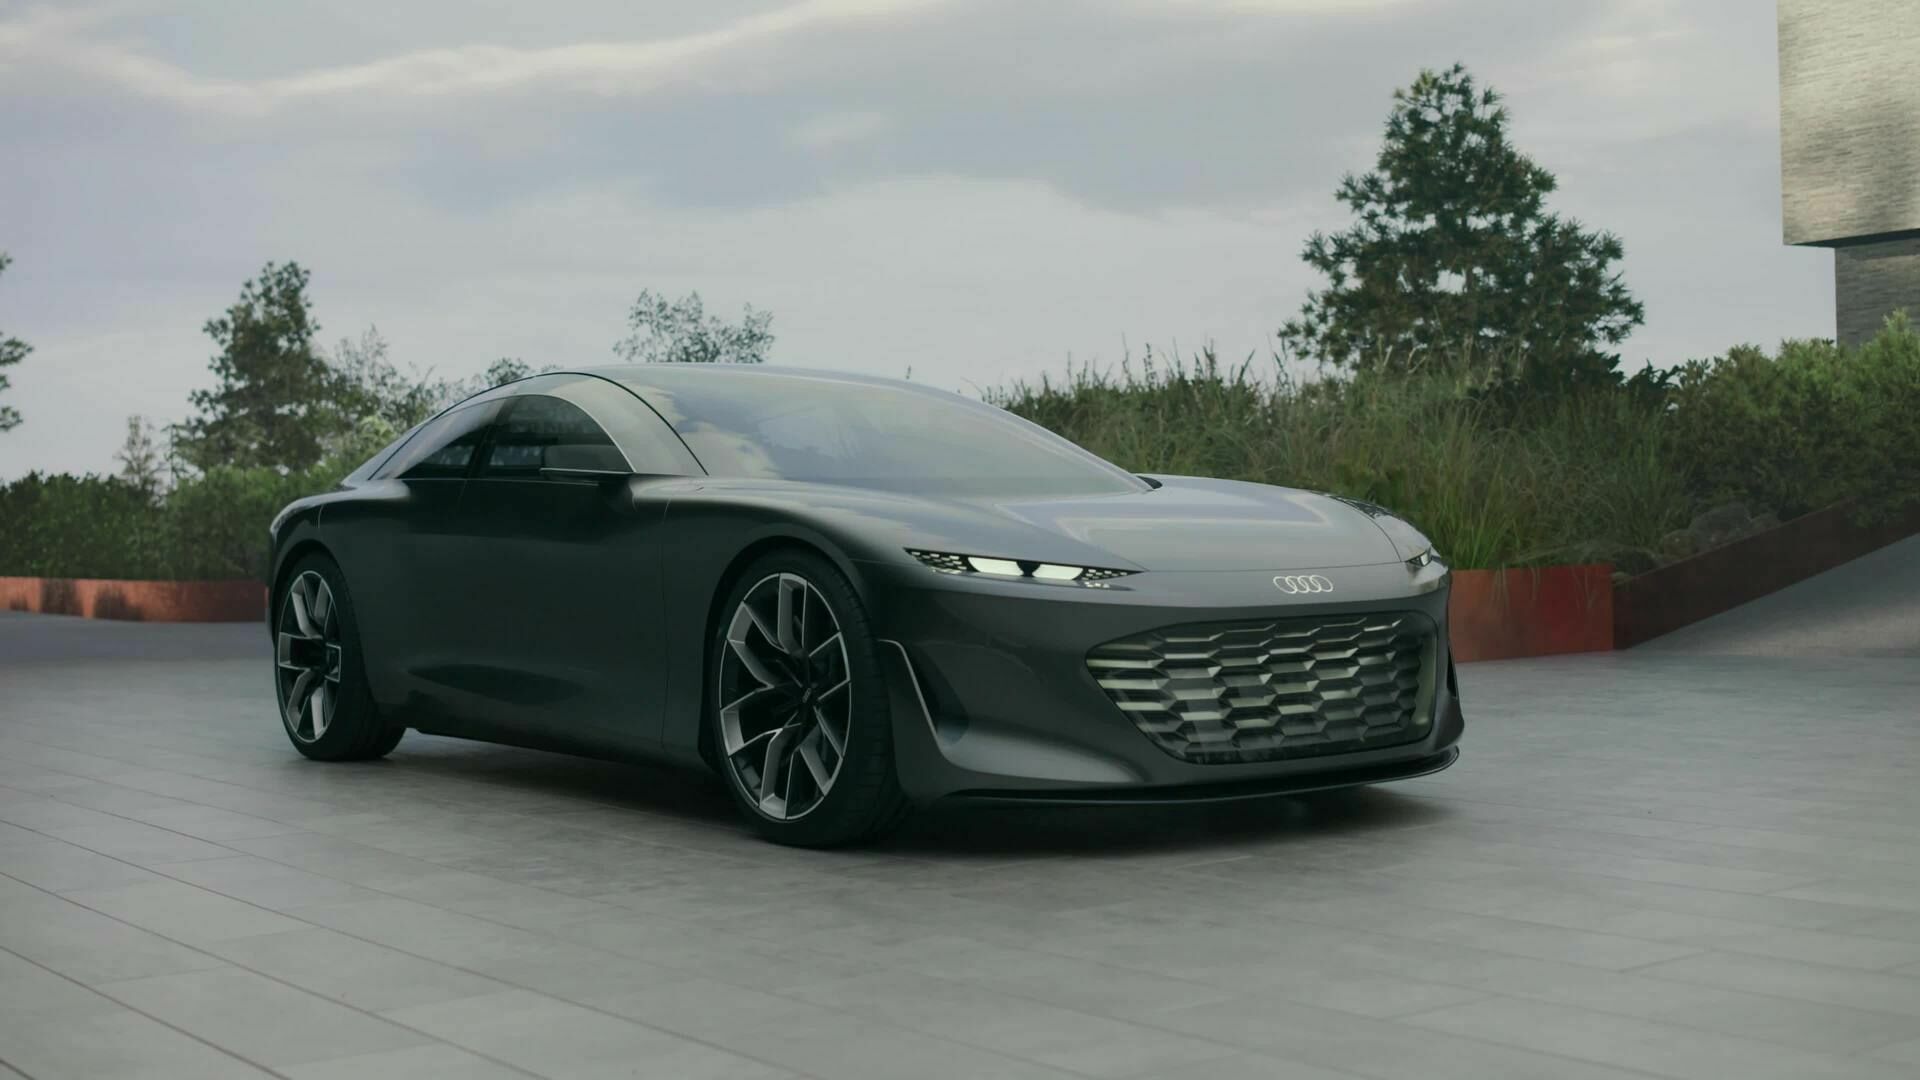 The future is now – the Audi grandsphere concept